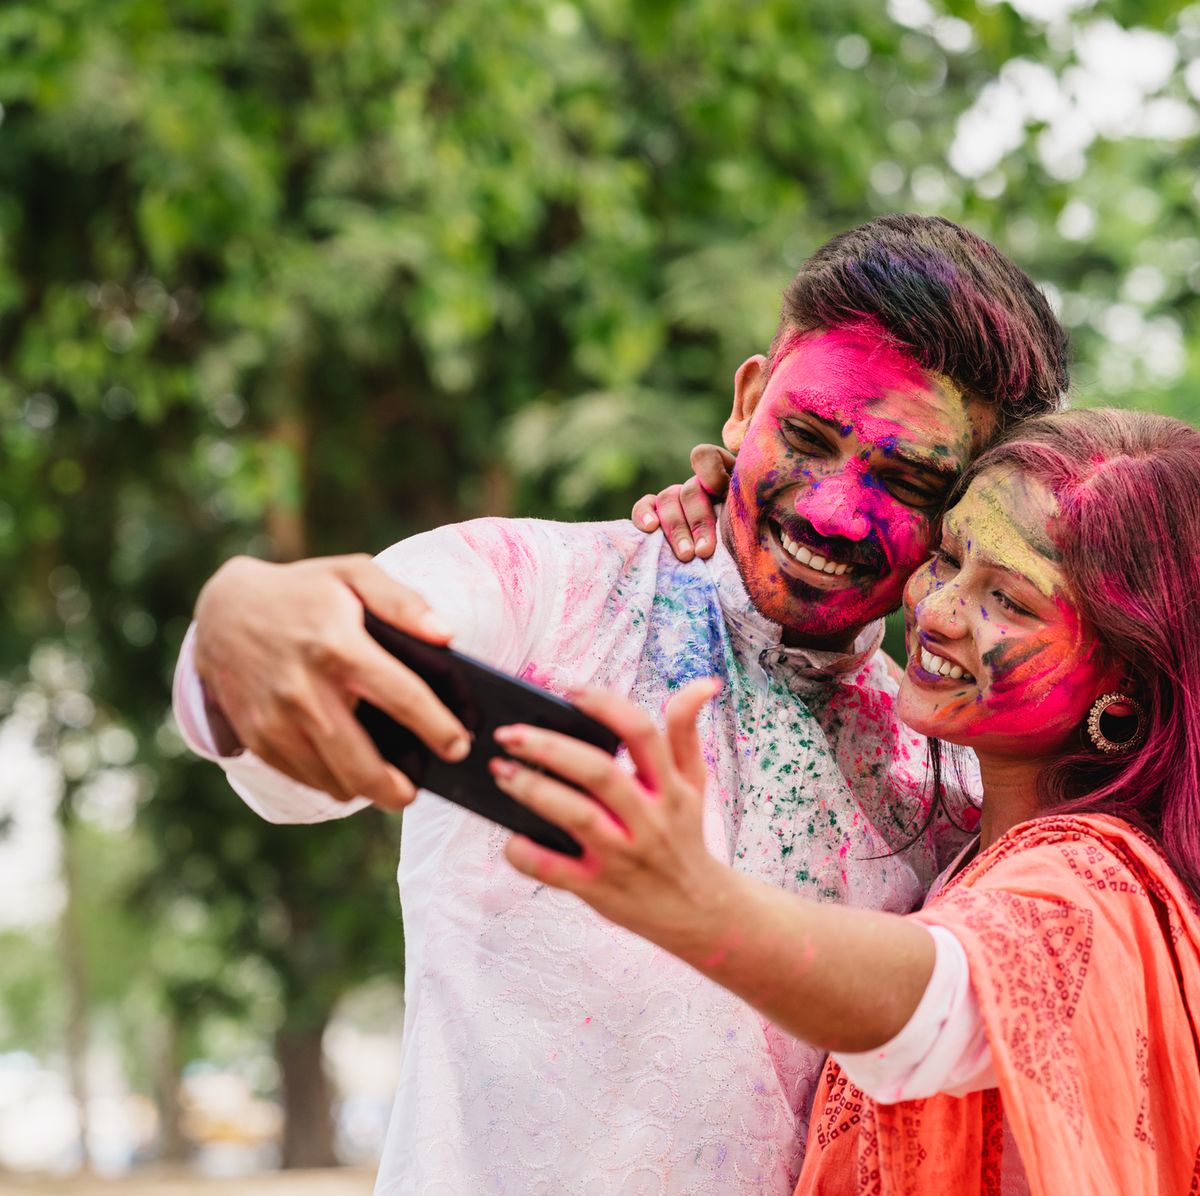 50 Best Holi Wishes, Quotes and Captions for Social Media in 2023